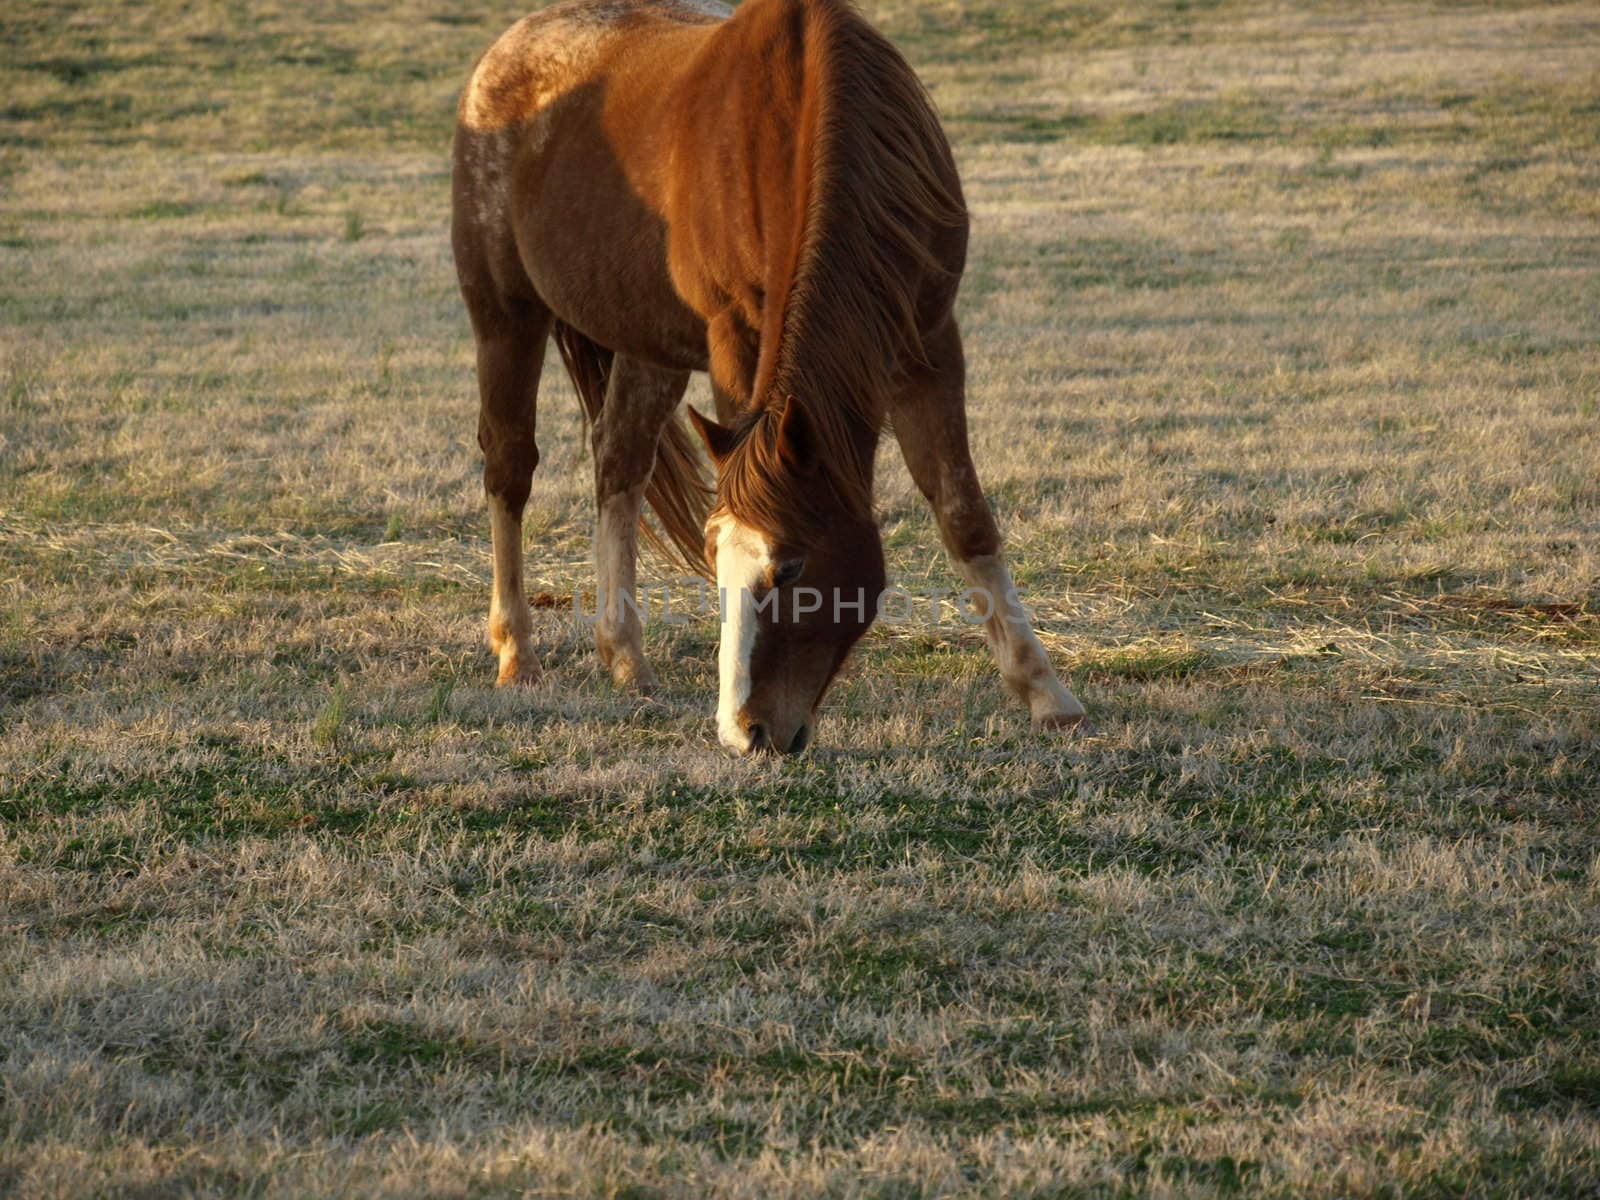 A large brown horse eating grass in the field